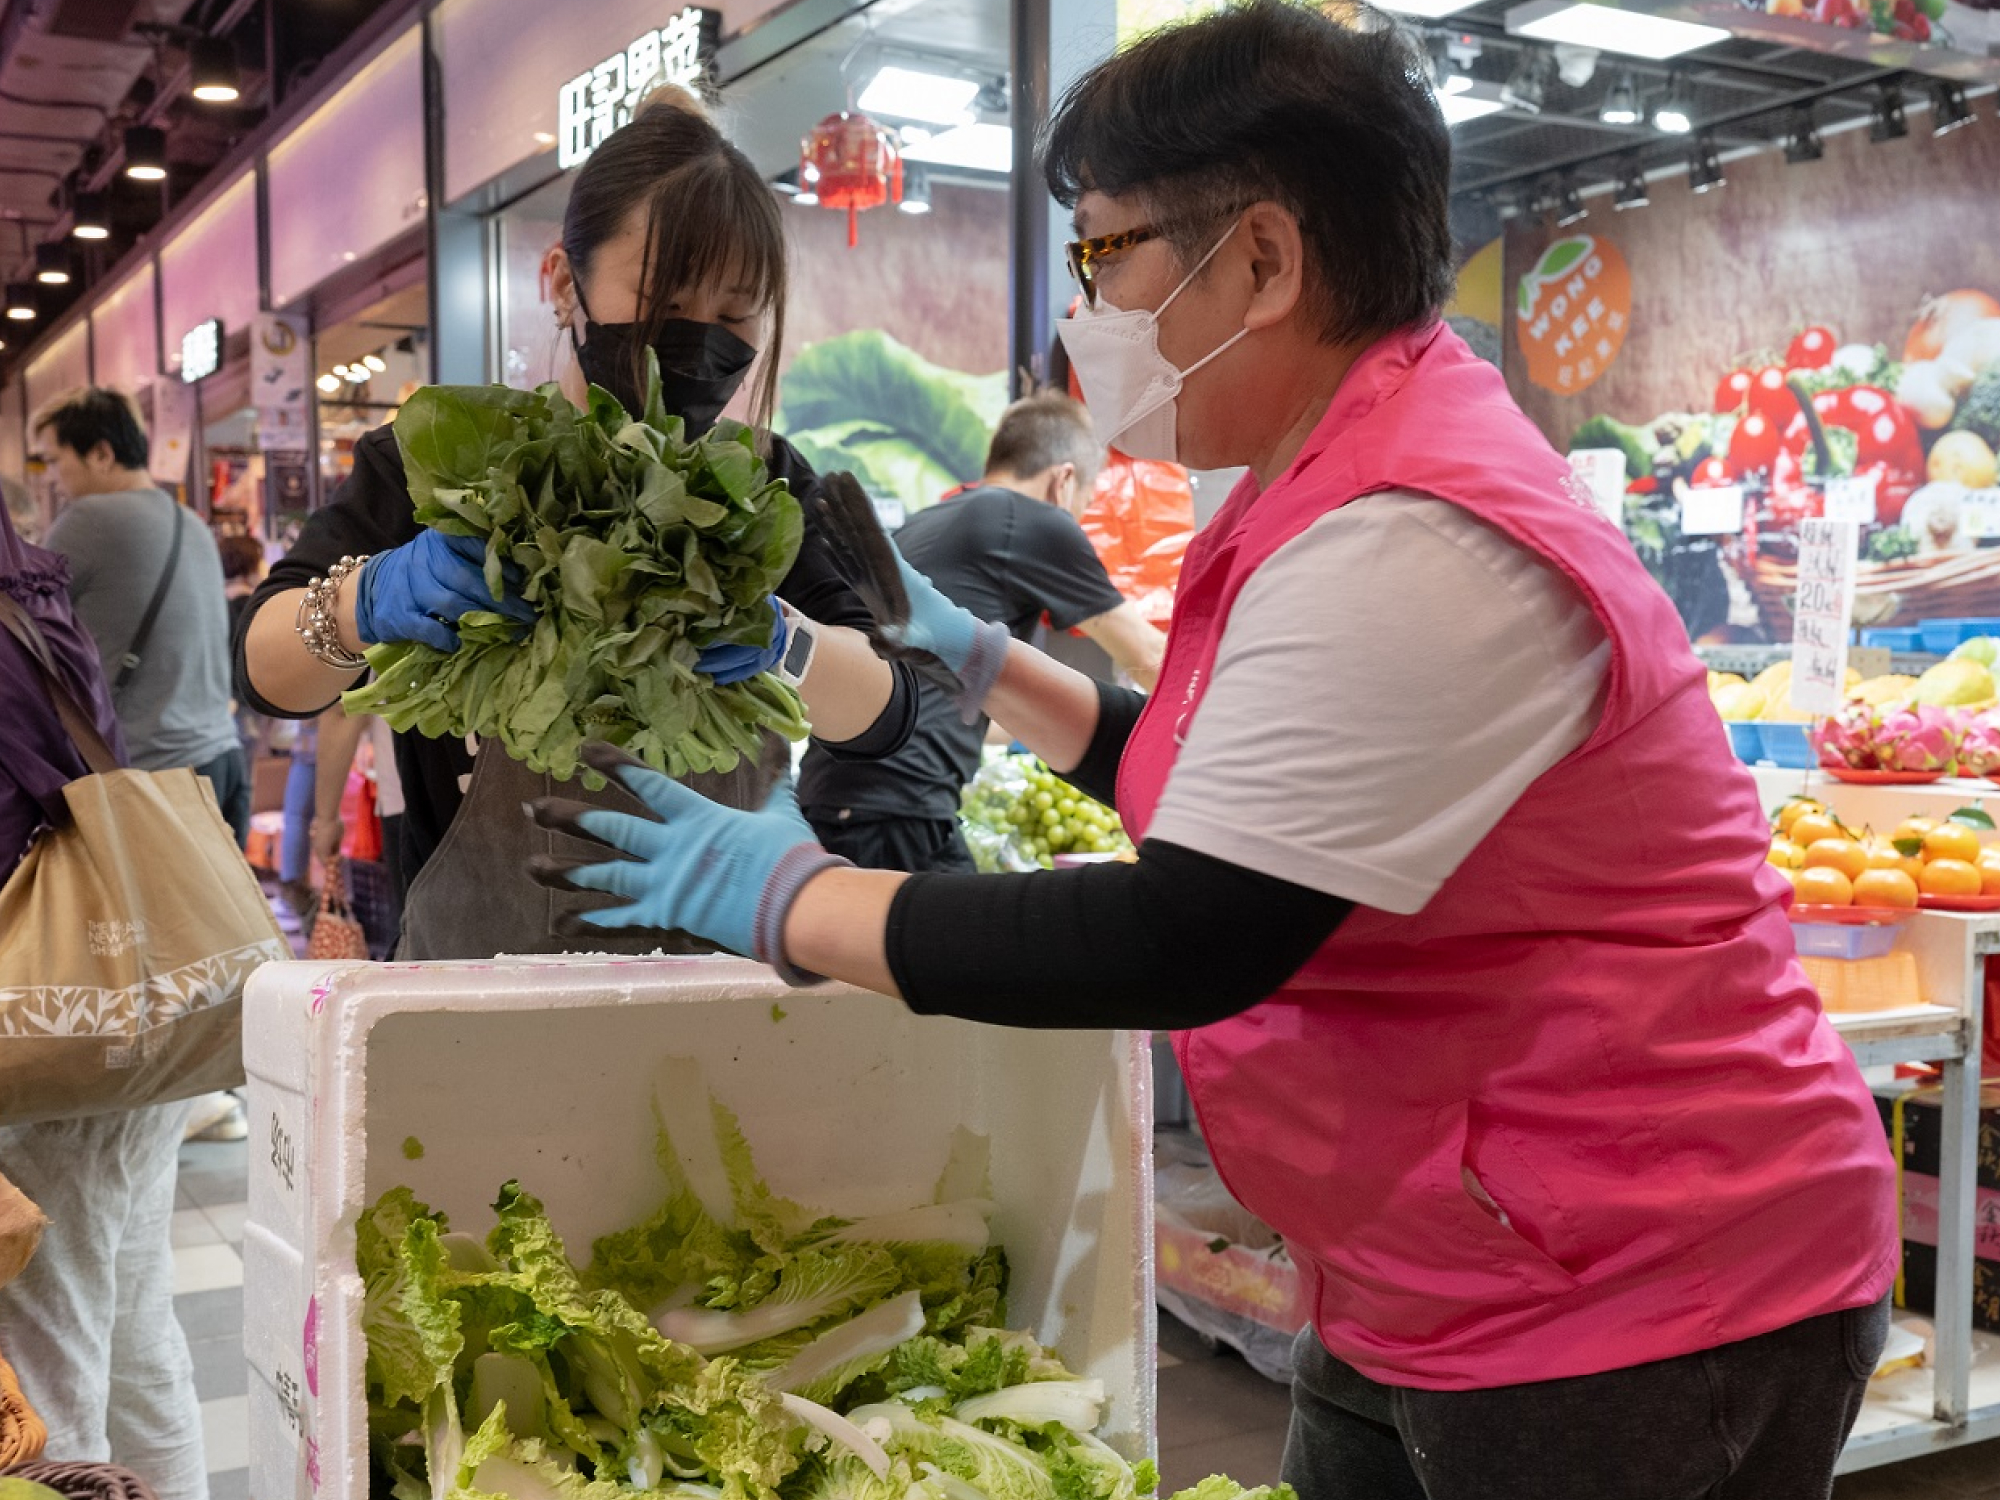 A vendor in a pink shirt and gloves hands fresh vegetables to a woman in a hijab at a busy indoor market. both wear masks.